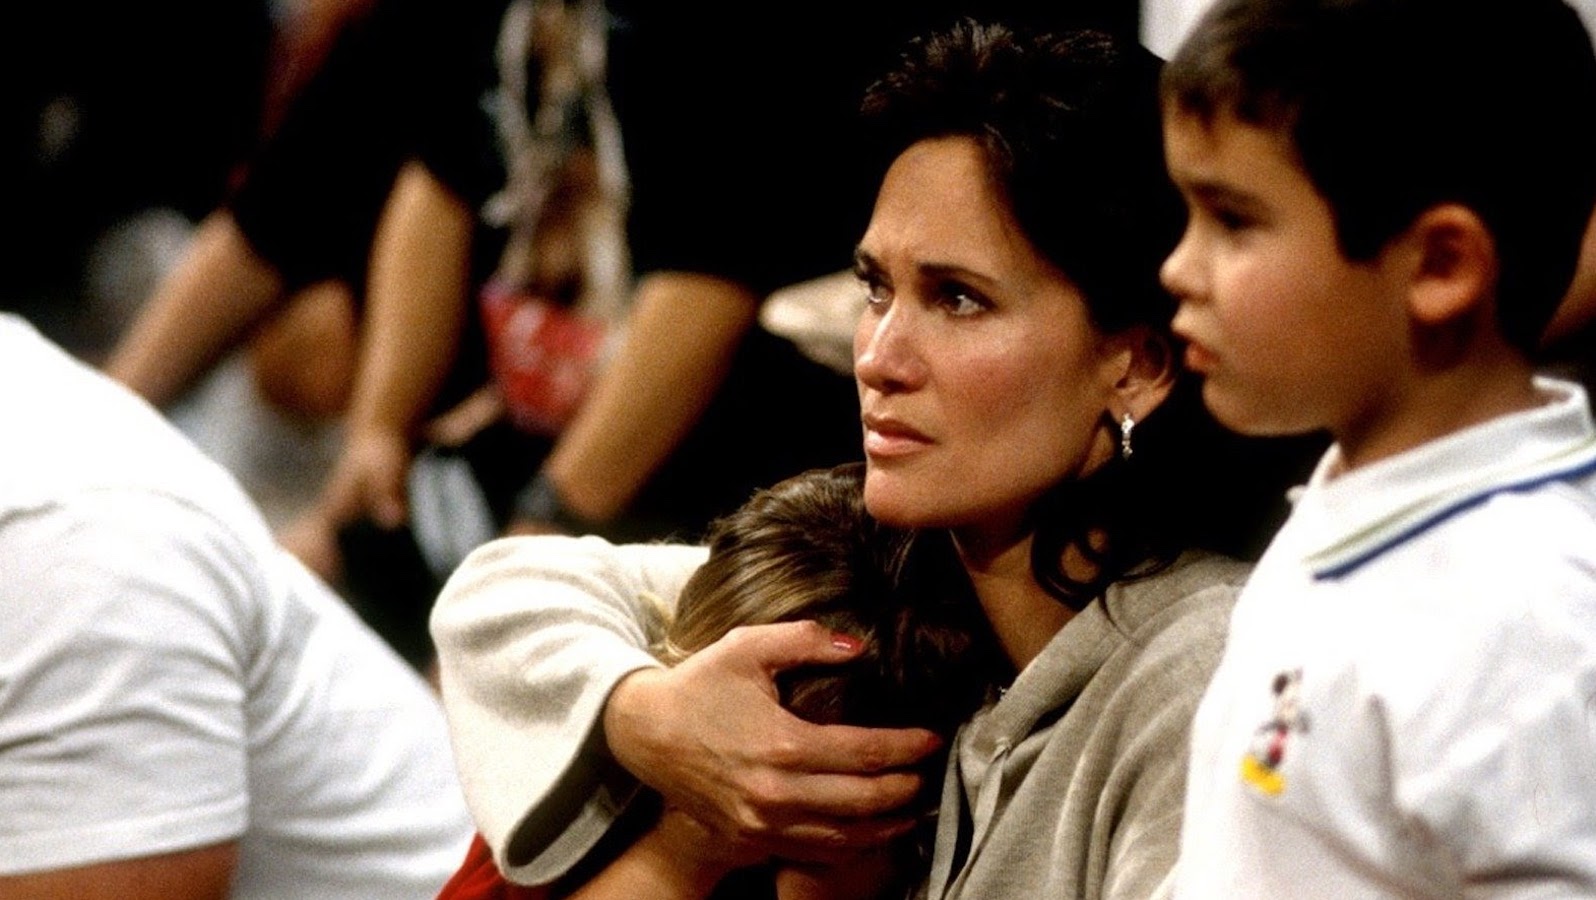 A woman in a sporting arena looks concerned as she holds her child's head close to her and another child stands beside her